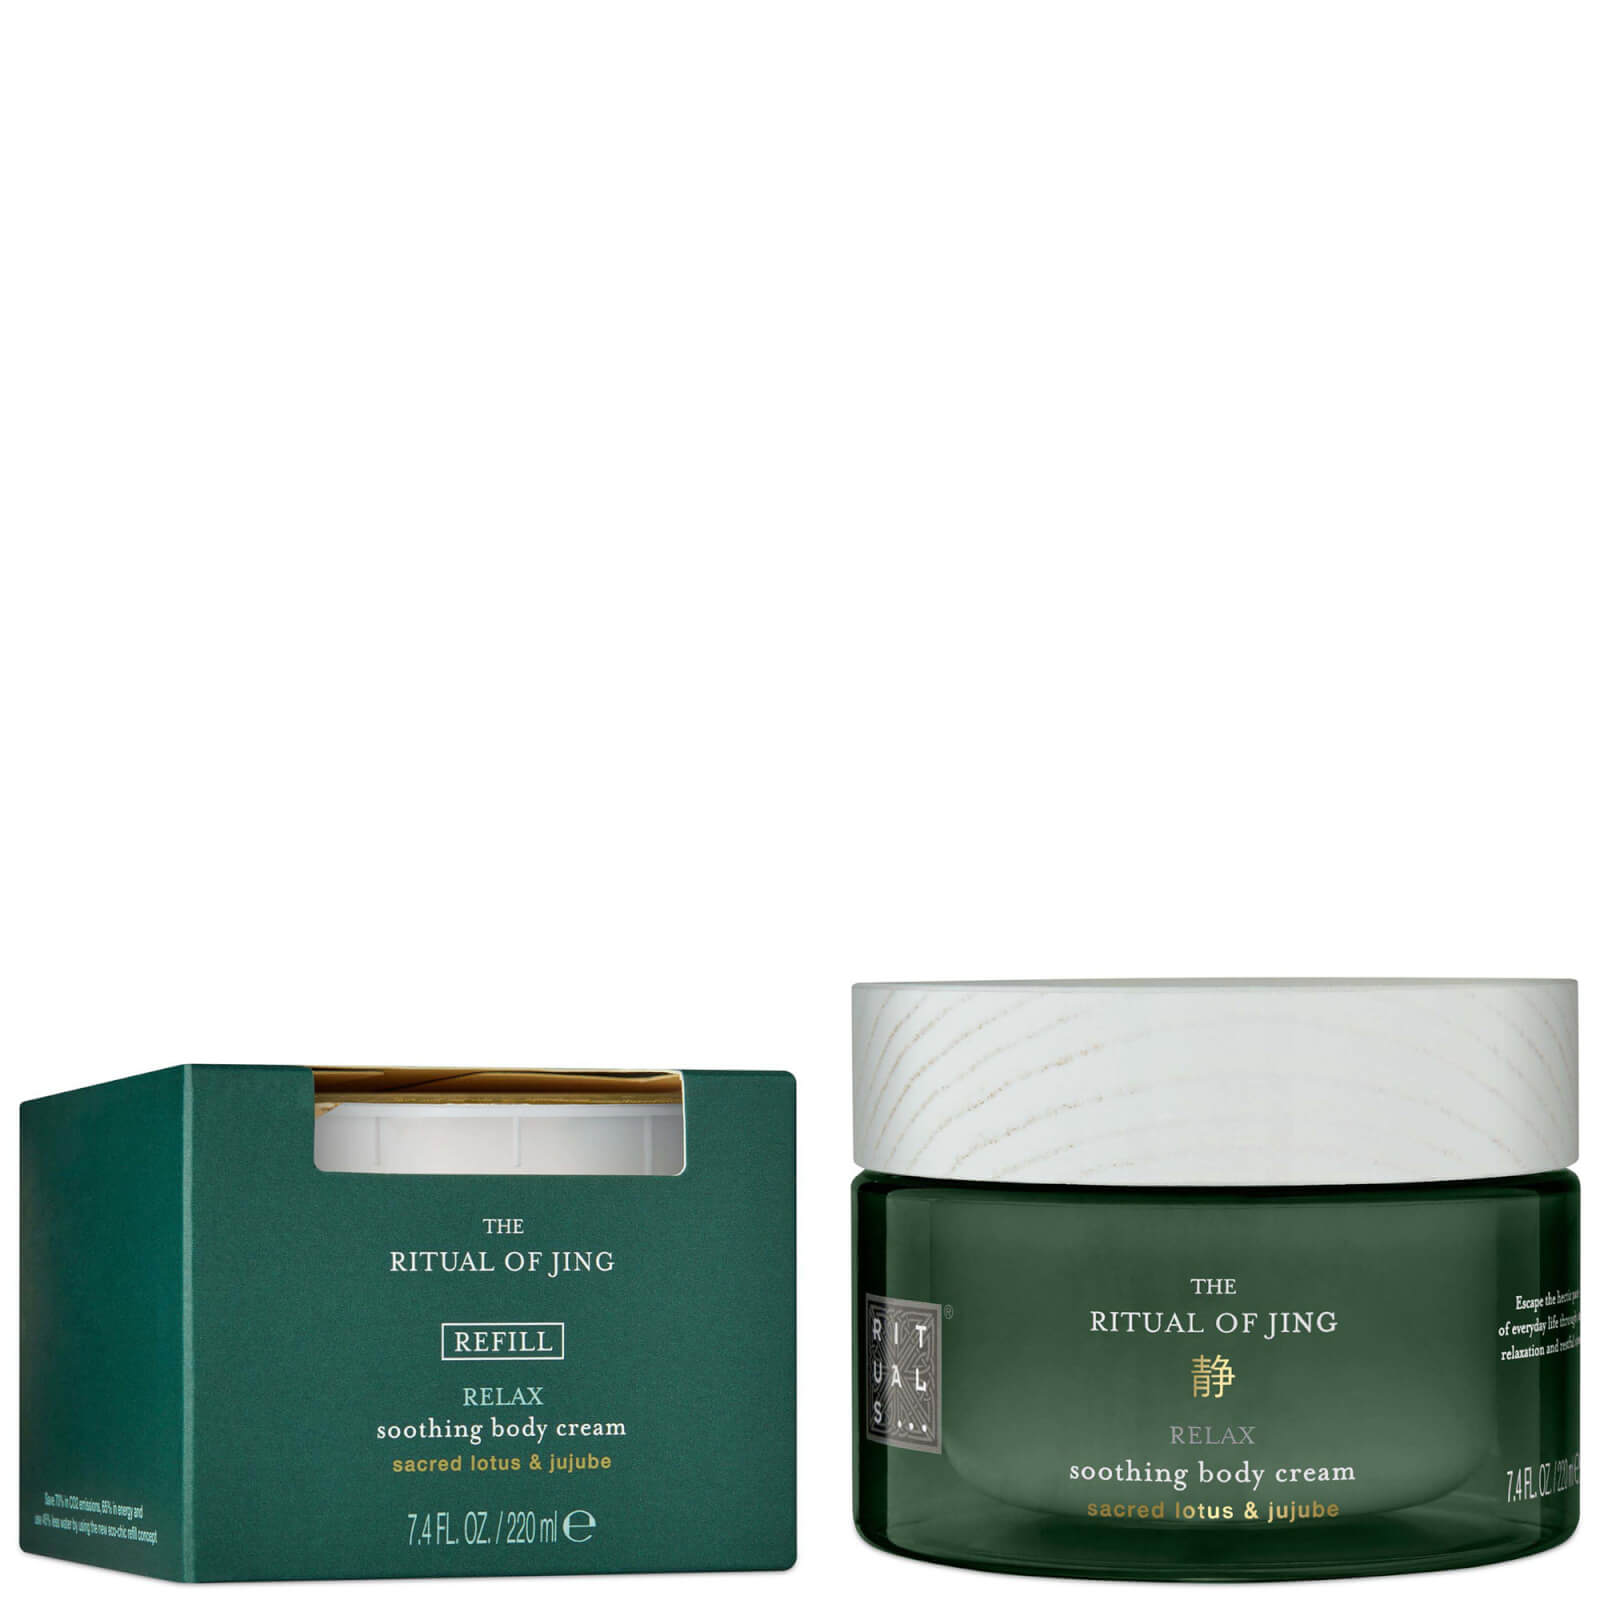 Image of Rituals The Ritual of Jing Subtle Floral Lotus & Jujube Moisturising Body Cream and Refill Pack 2 x 220ml